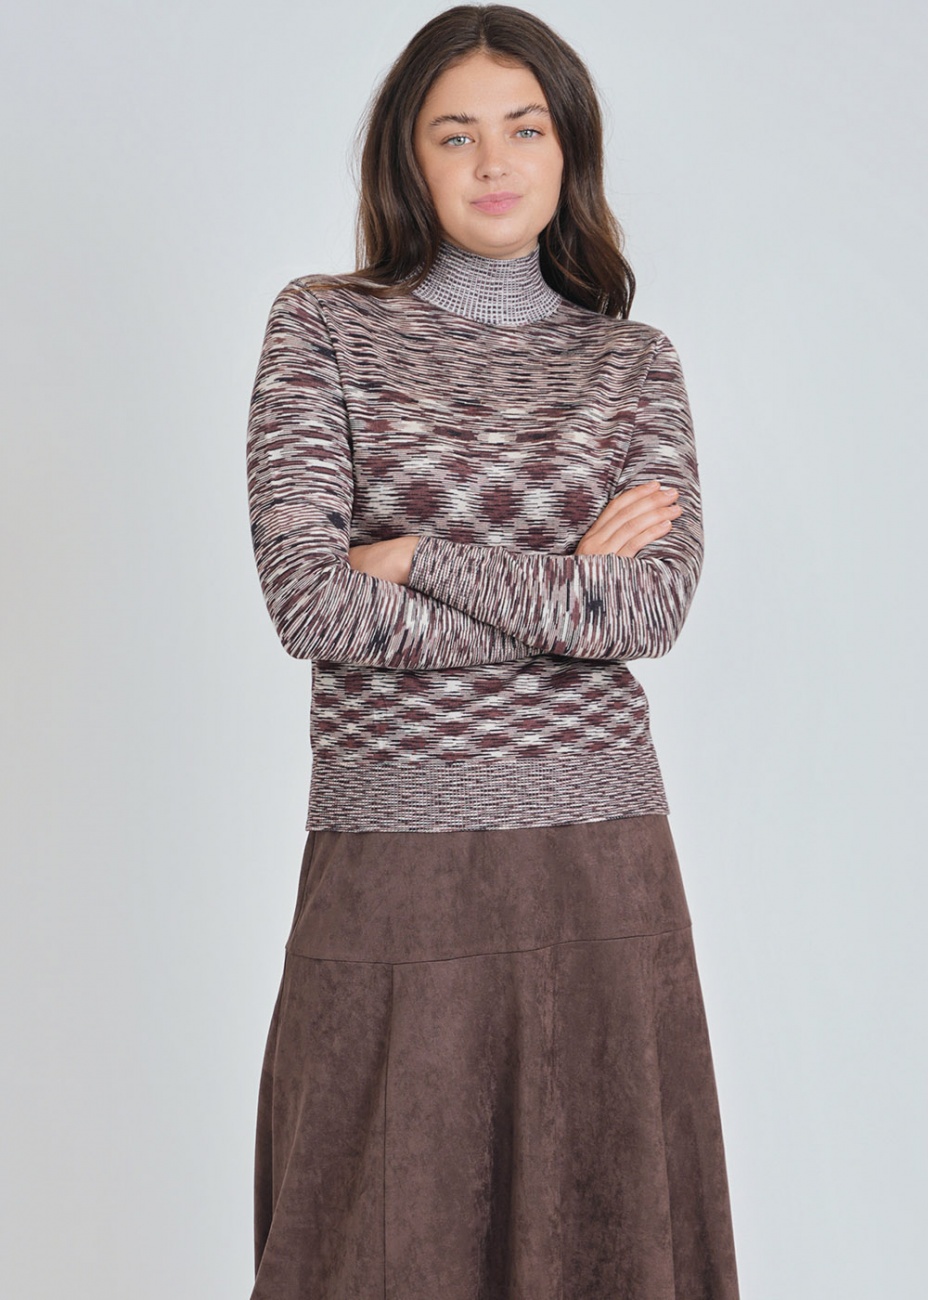 Brown Knit Top with Sky-High Neck & Waves